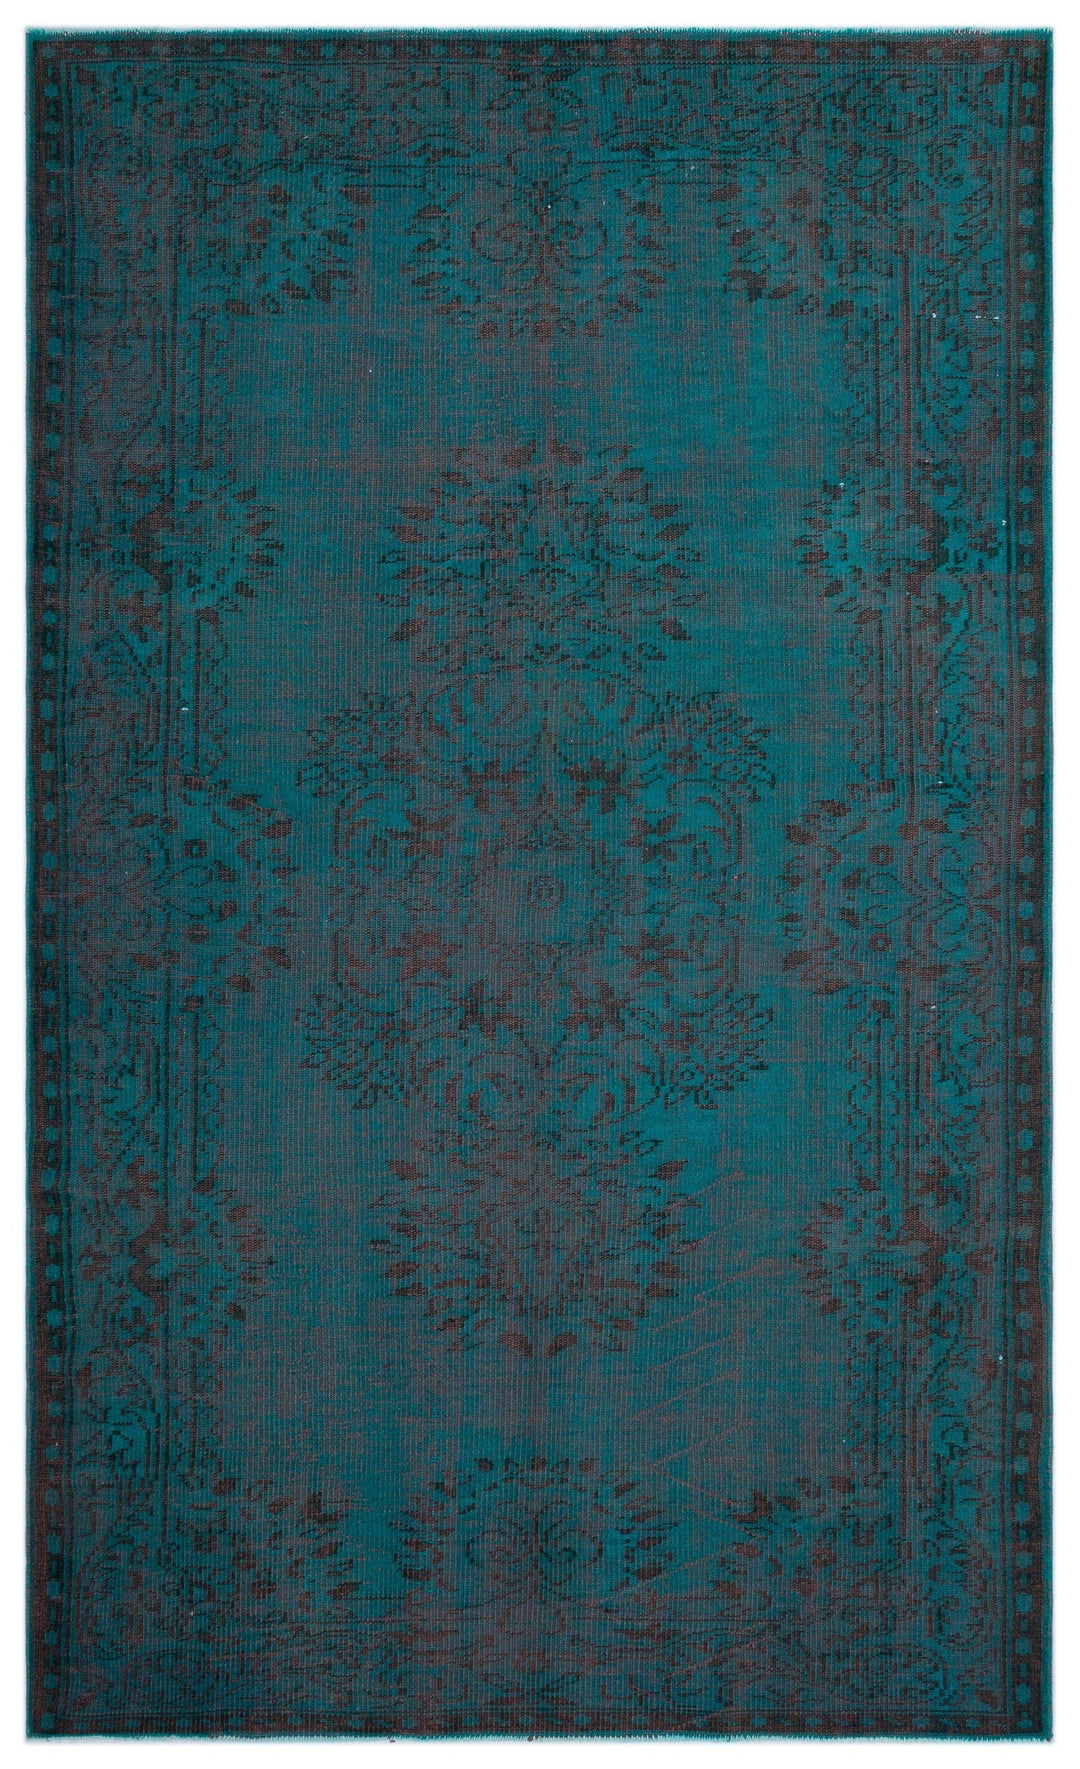 Athens Turquoise Tumbled Wool Hand Woven Rug 171 x 289